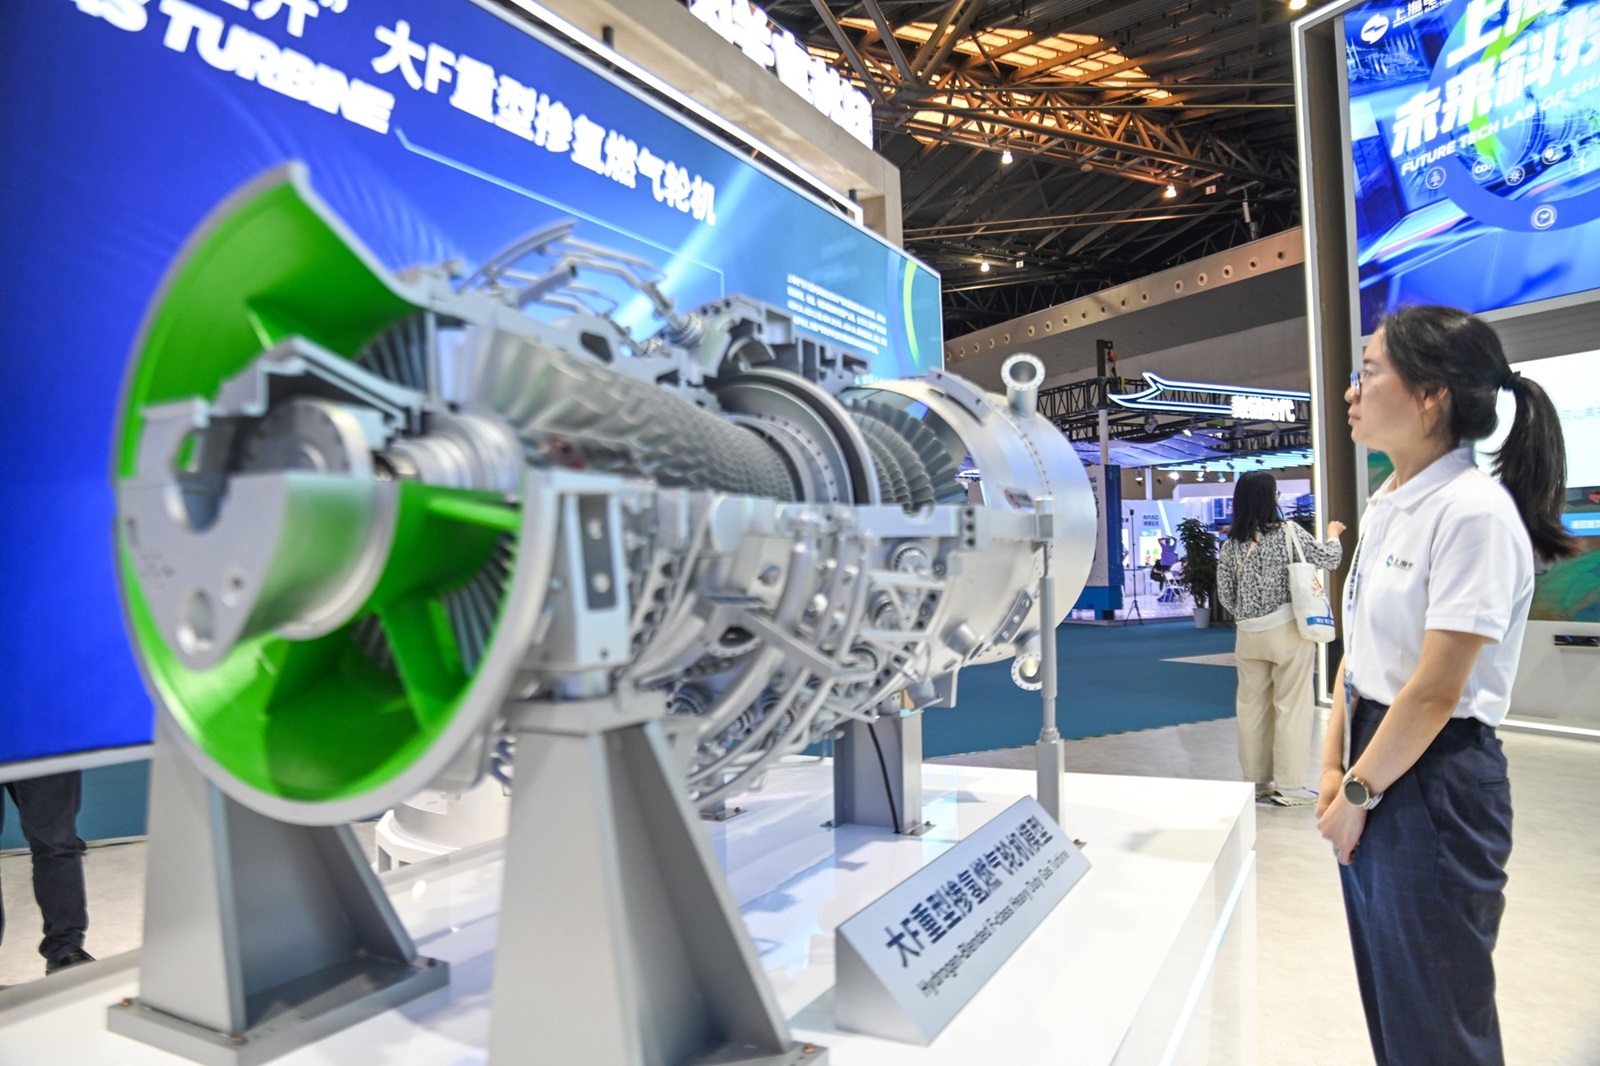 10th China Shanghai International Technology Fair Held in Shanghai SHANGHAI, CHINA - JUNE 13, 2024 - Visitors view a model exhibit of a heavy-duty hydrogen-doped gas turbine at The 10th China Shanghai International Technology Fair in Shanghai, China, June 13, 2024. Shanghai Shanghai China Copyright: xx i1718324631187,Image: 881540554, License: Rights-managed, Restrictions: imago is entitled to issue a simple usage license at the time of provision. Personality and trademark rights as well as copyright laws regarding art-works shown must be observed. Commercial use at your own risk.;PUBLICATIONxNOTxINxCHN, Credit images as "Profimedia/ IMAGO", Model Release: no, Credit line: CFOTO / imago stock&people / Profimedia